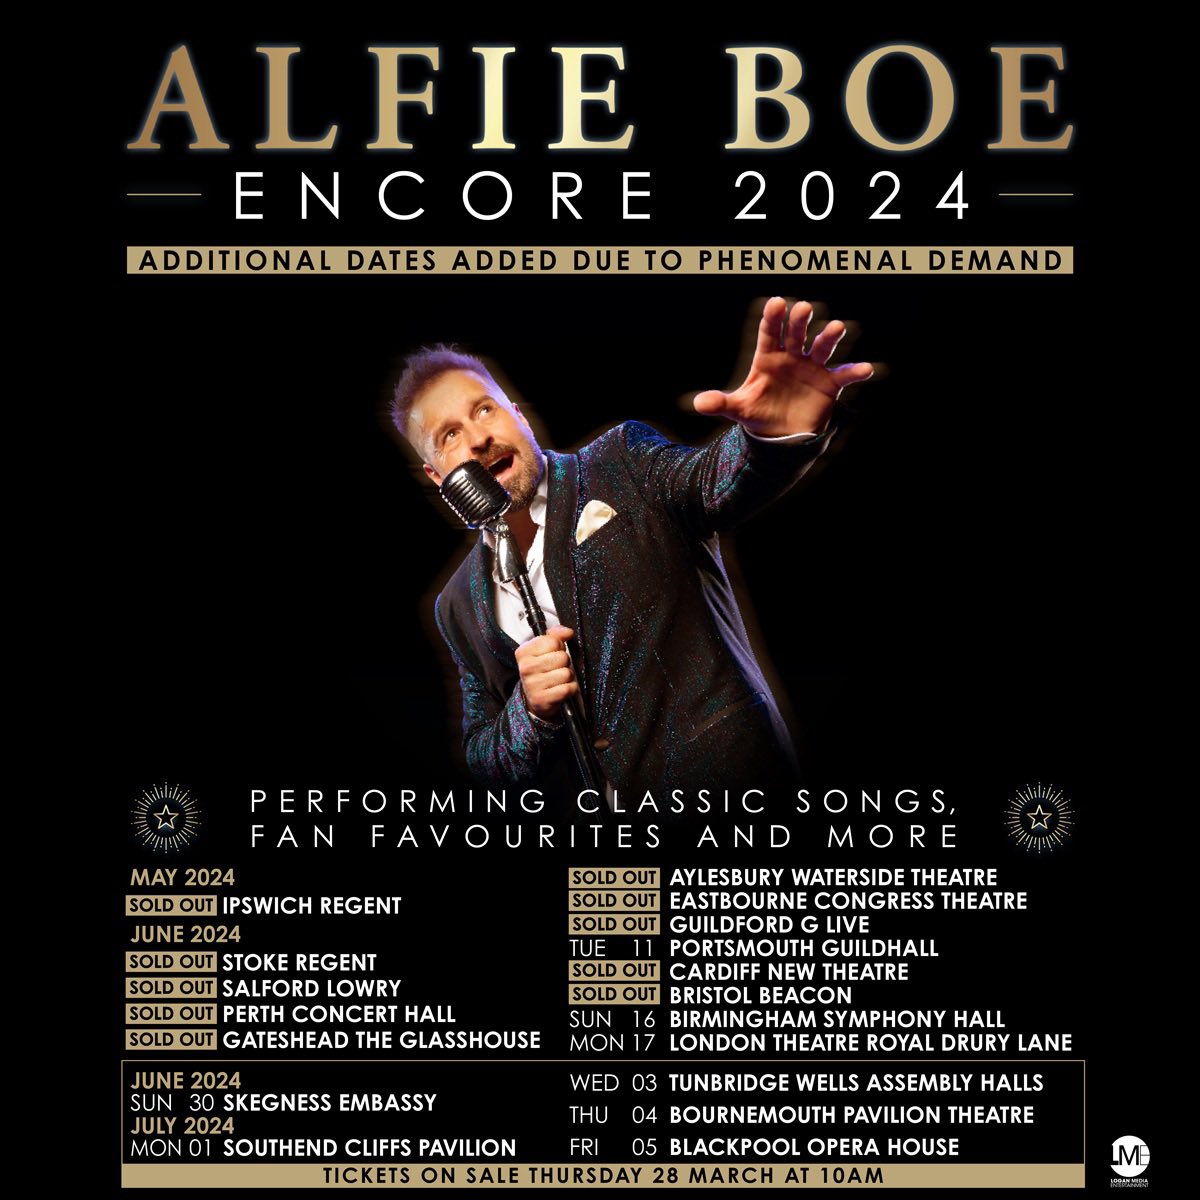 Due to huge demand, classical crossover star @AlfieBoe has extended his UK tour to July, where he'll be performing an assortment of classic songs, fan favourites, and much more! Don't miss out: tickets are on sale NOW👇 tinyurl.com/jaf2r9v6